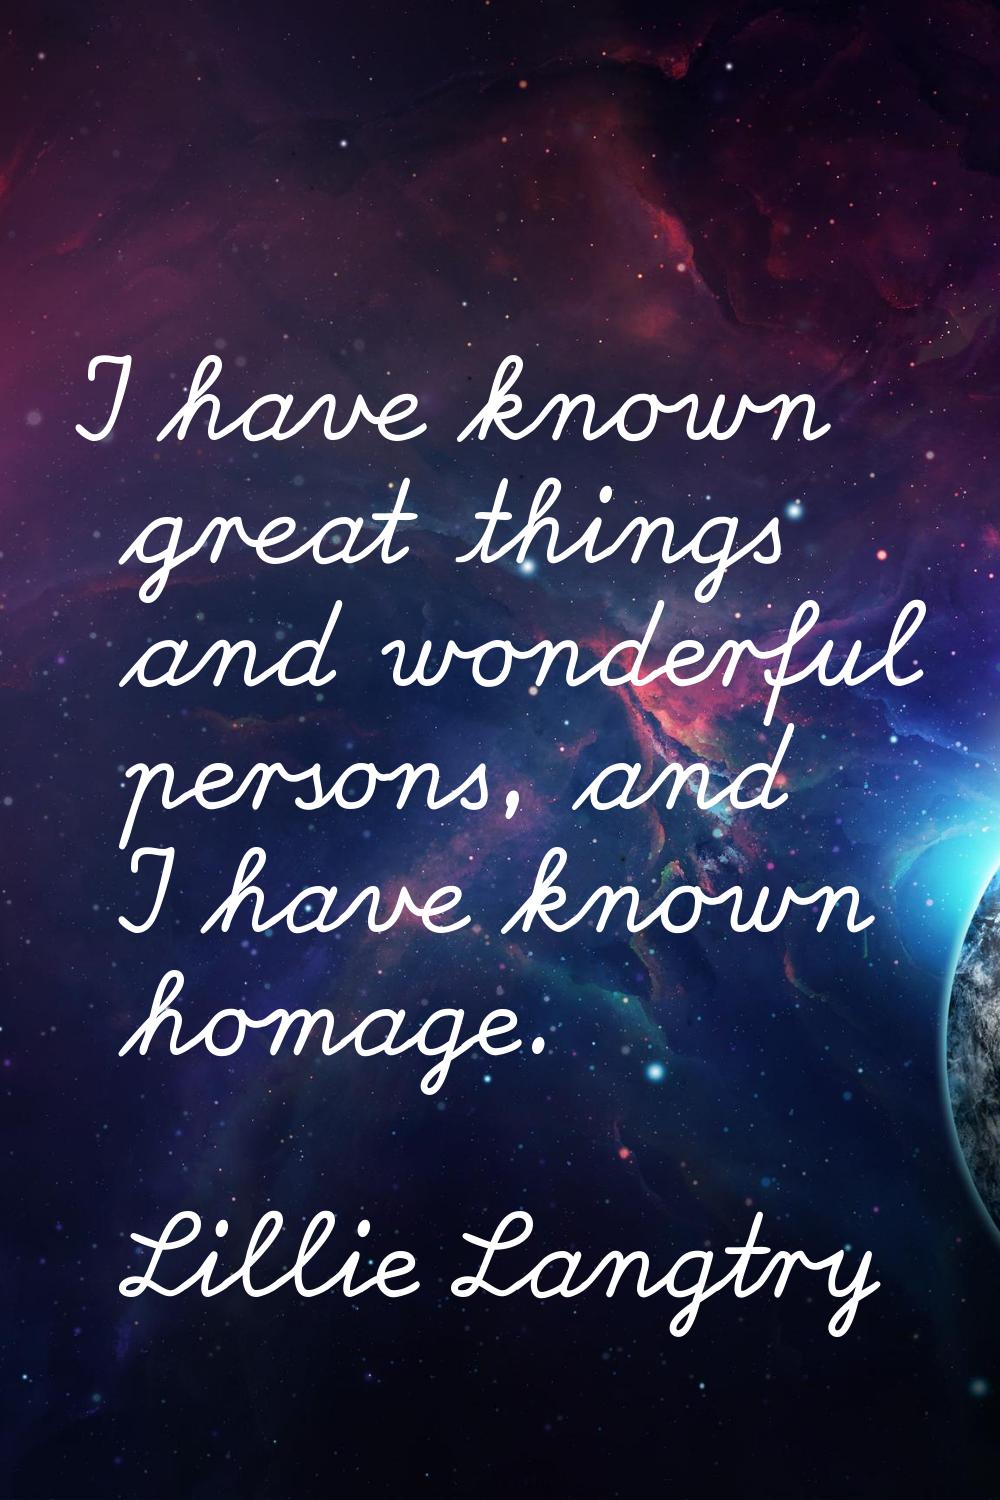 I have known great things and wonderful persons, and I have known homage.